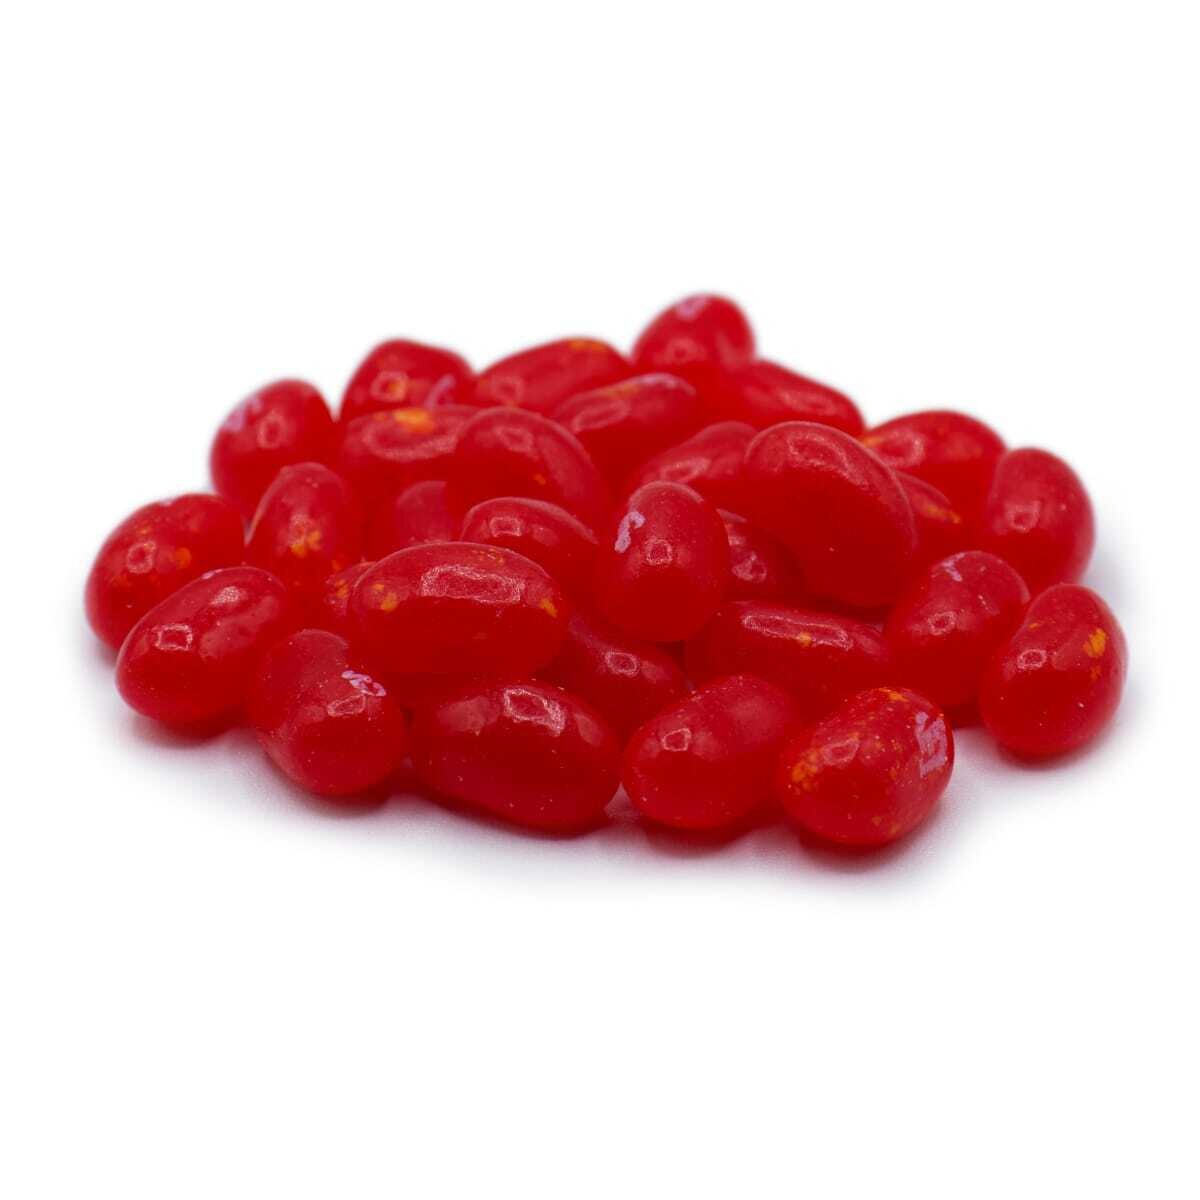 SIZZLING CINNAMON - Jelly Belly Jelly Beans